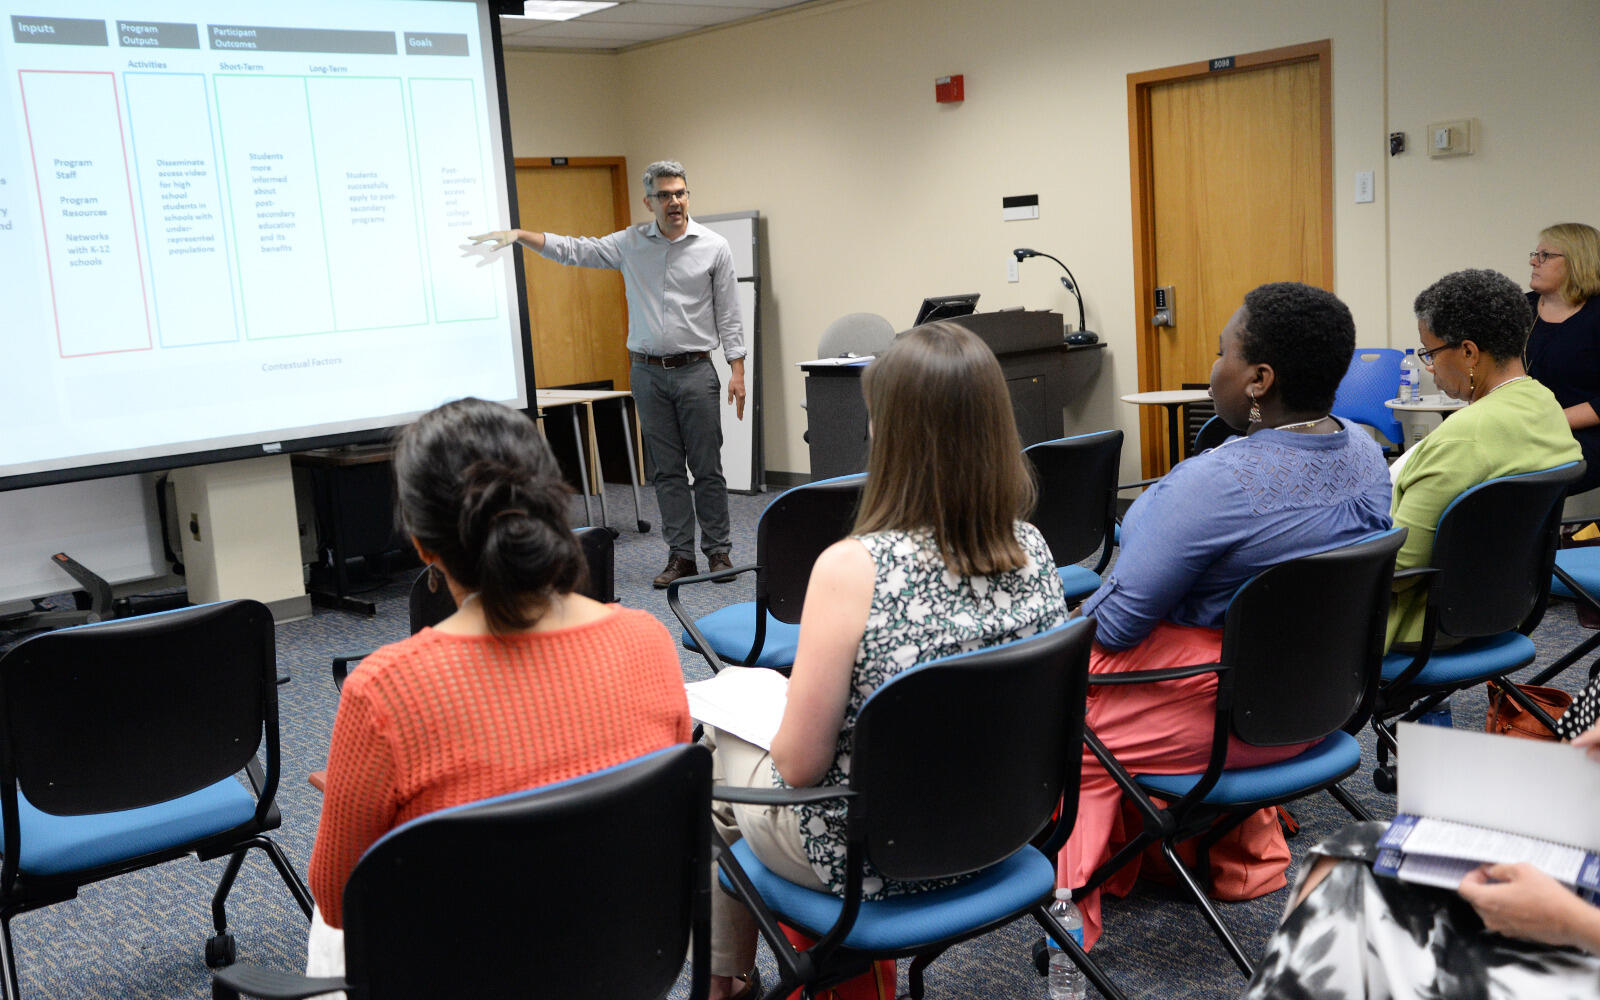 Jesse Senechal, Ph.D., assistant professor in the Department of Foundations of Education and interim director of the Metropolitan Educational Research Consortium, gave the audience tips on how to best use "logic models" to evaluate their programs.